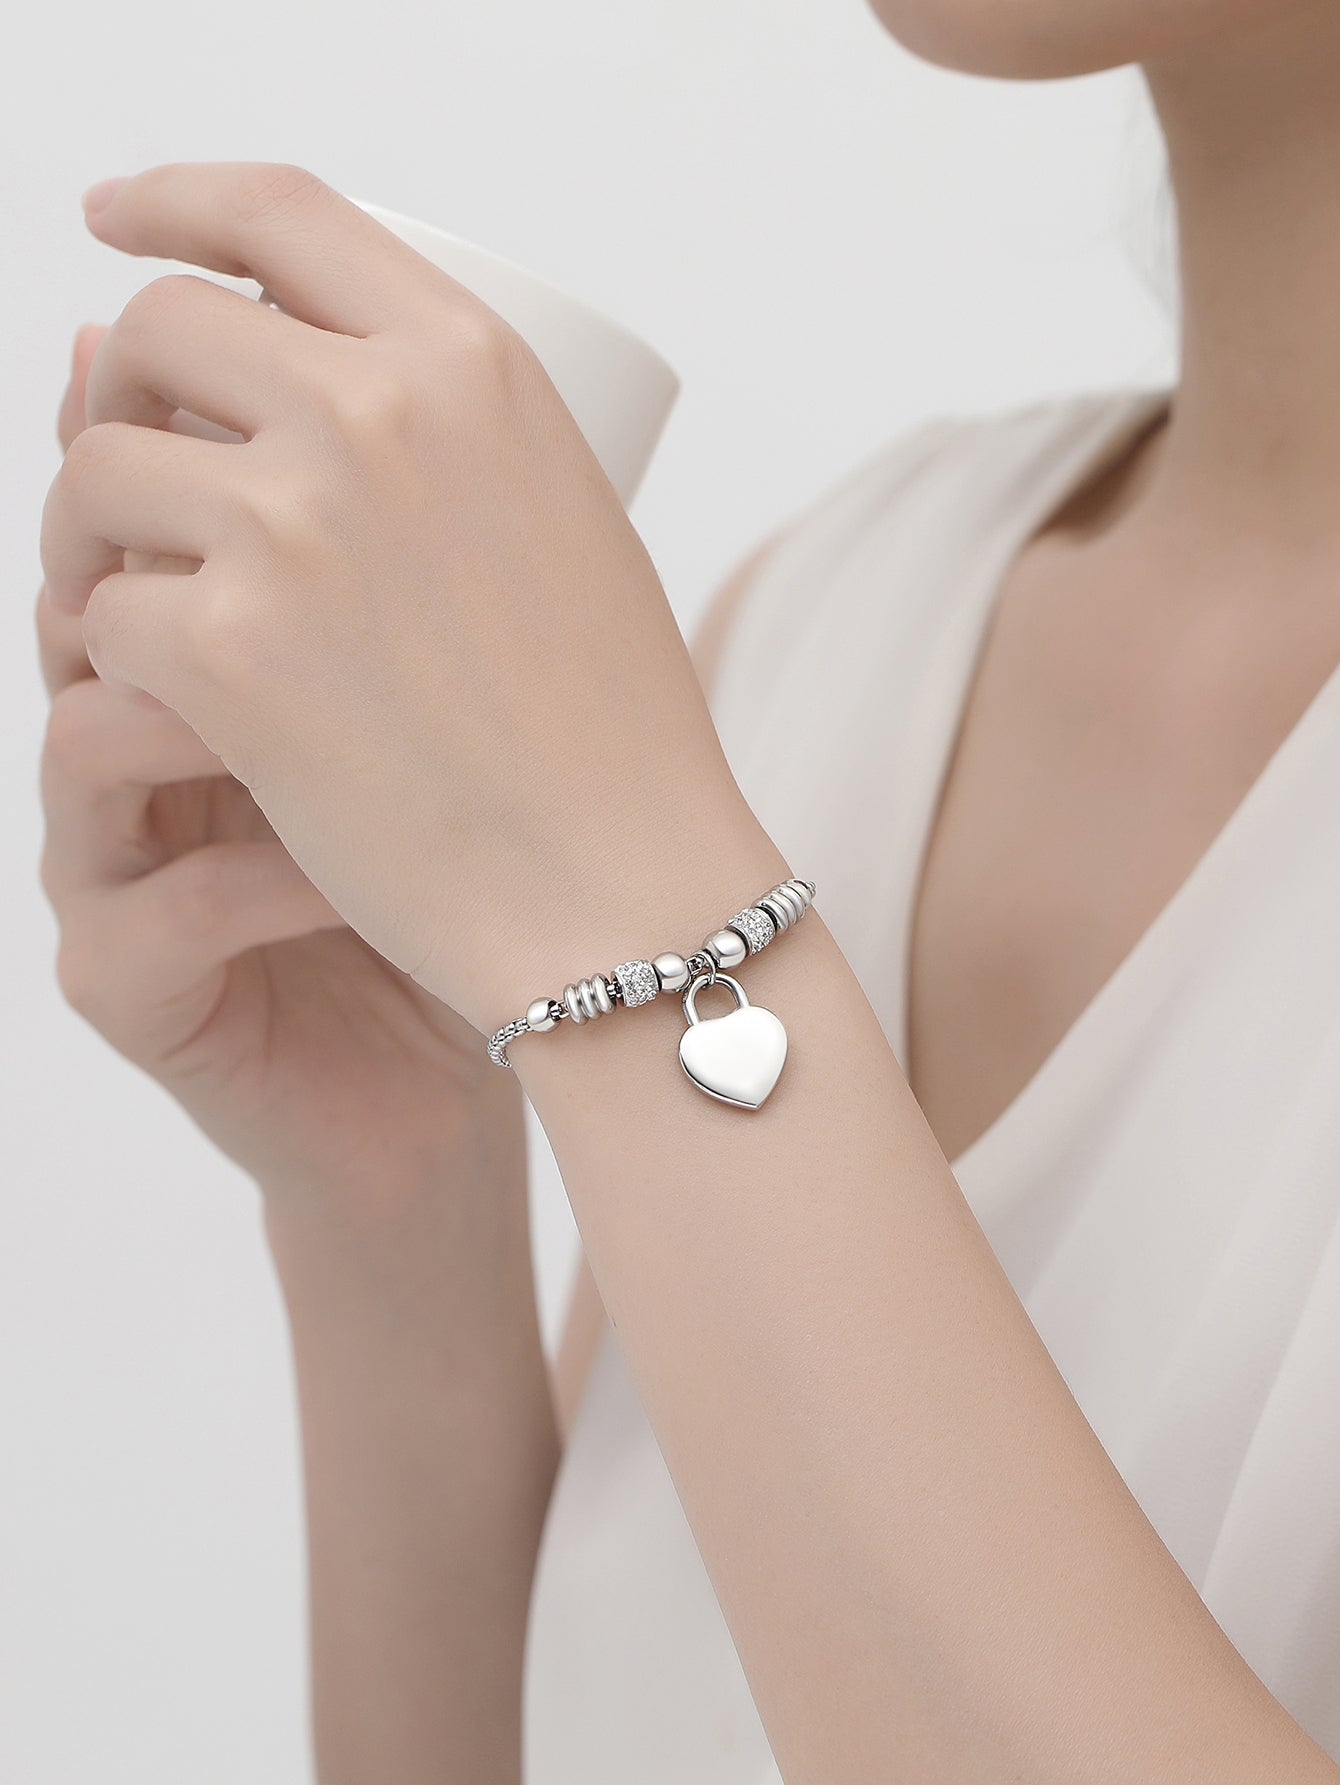 Stainless Steel Heart Bracelet - A Meaningful Gift for Women, Perfect for Christmas and New Year's Celebrations